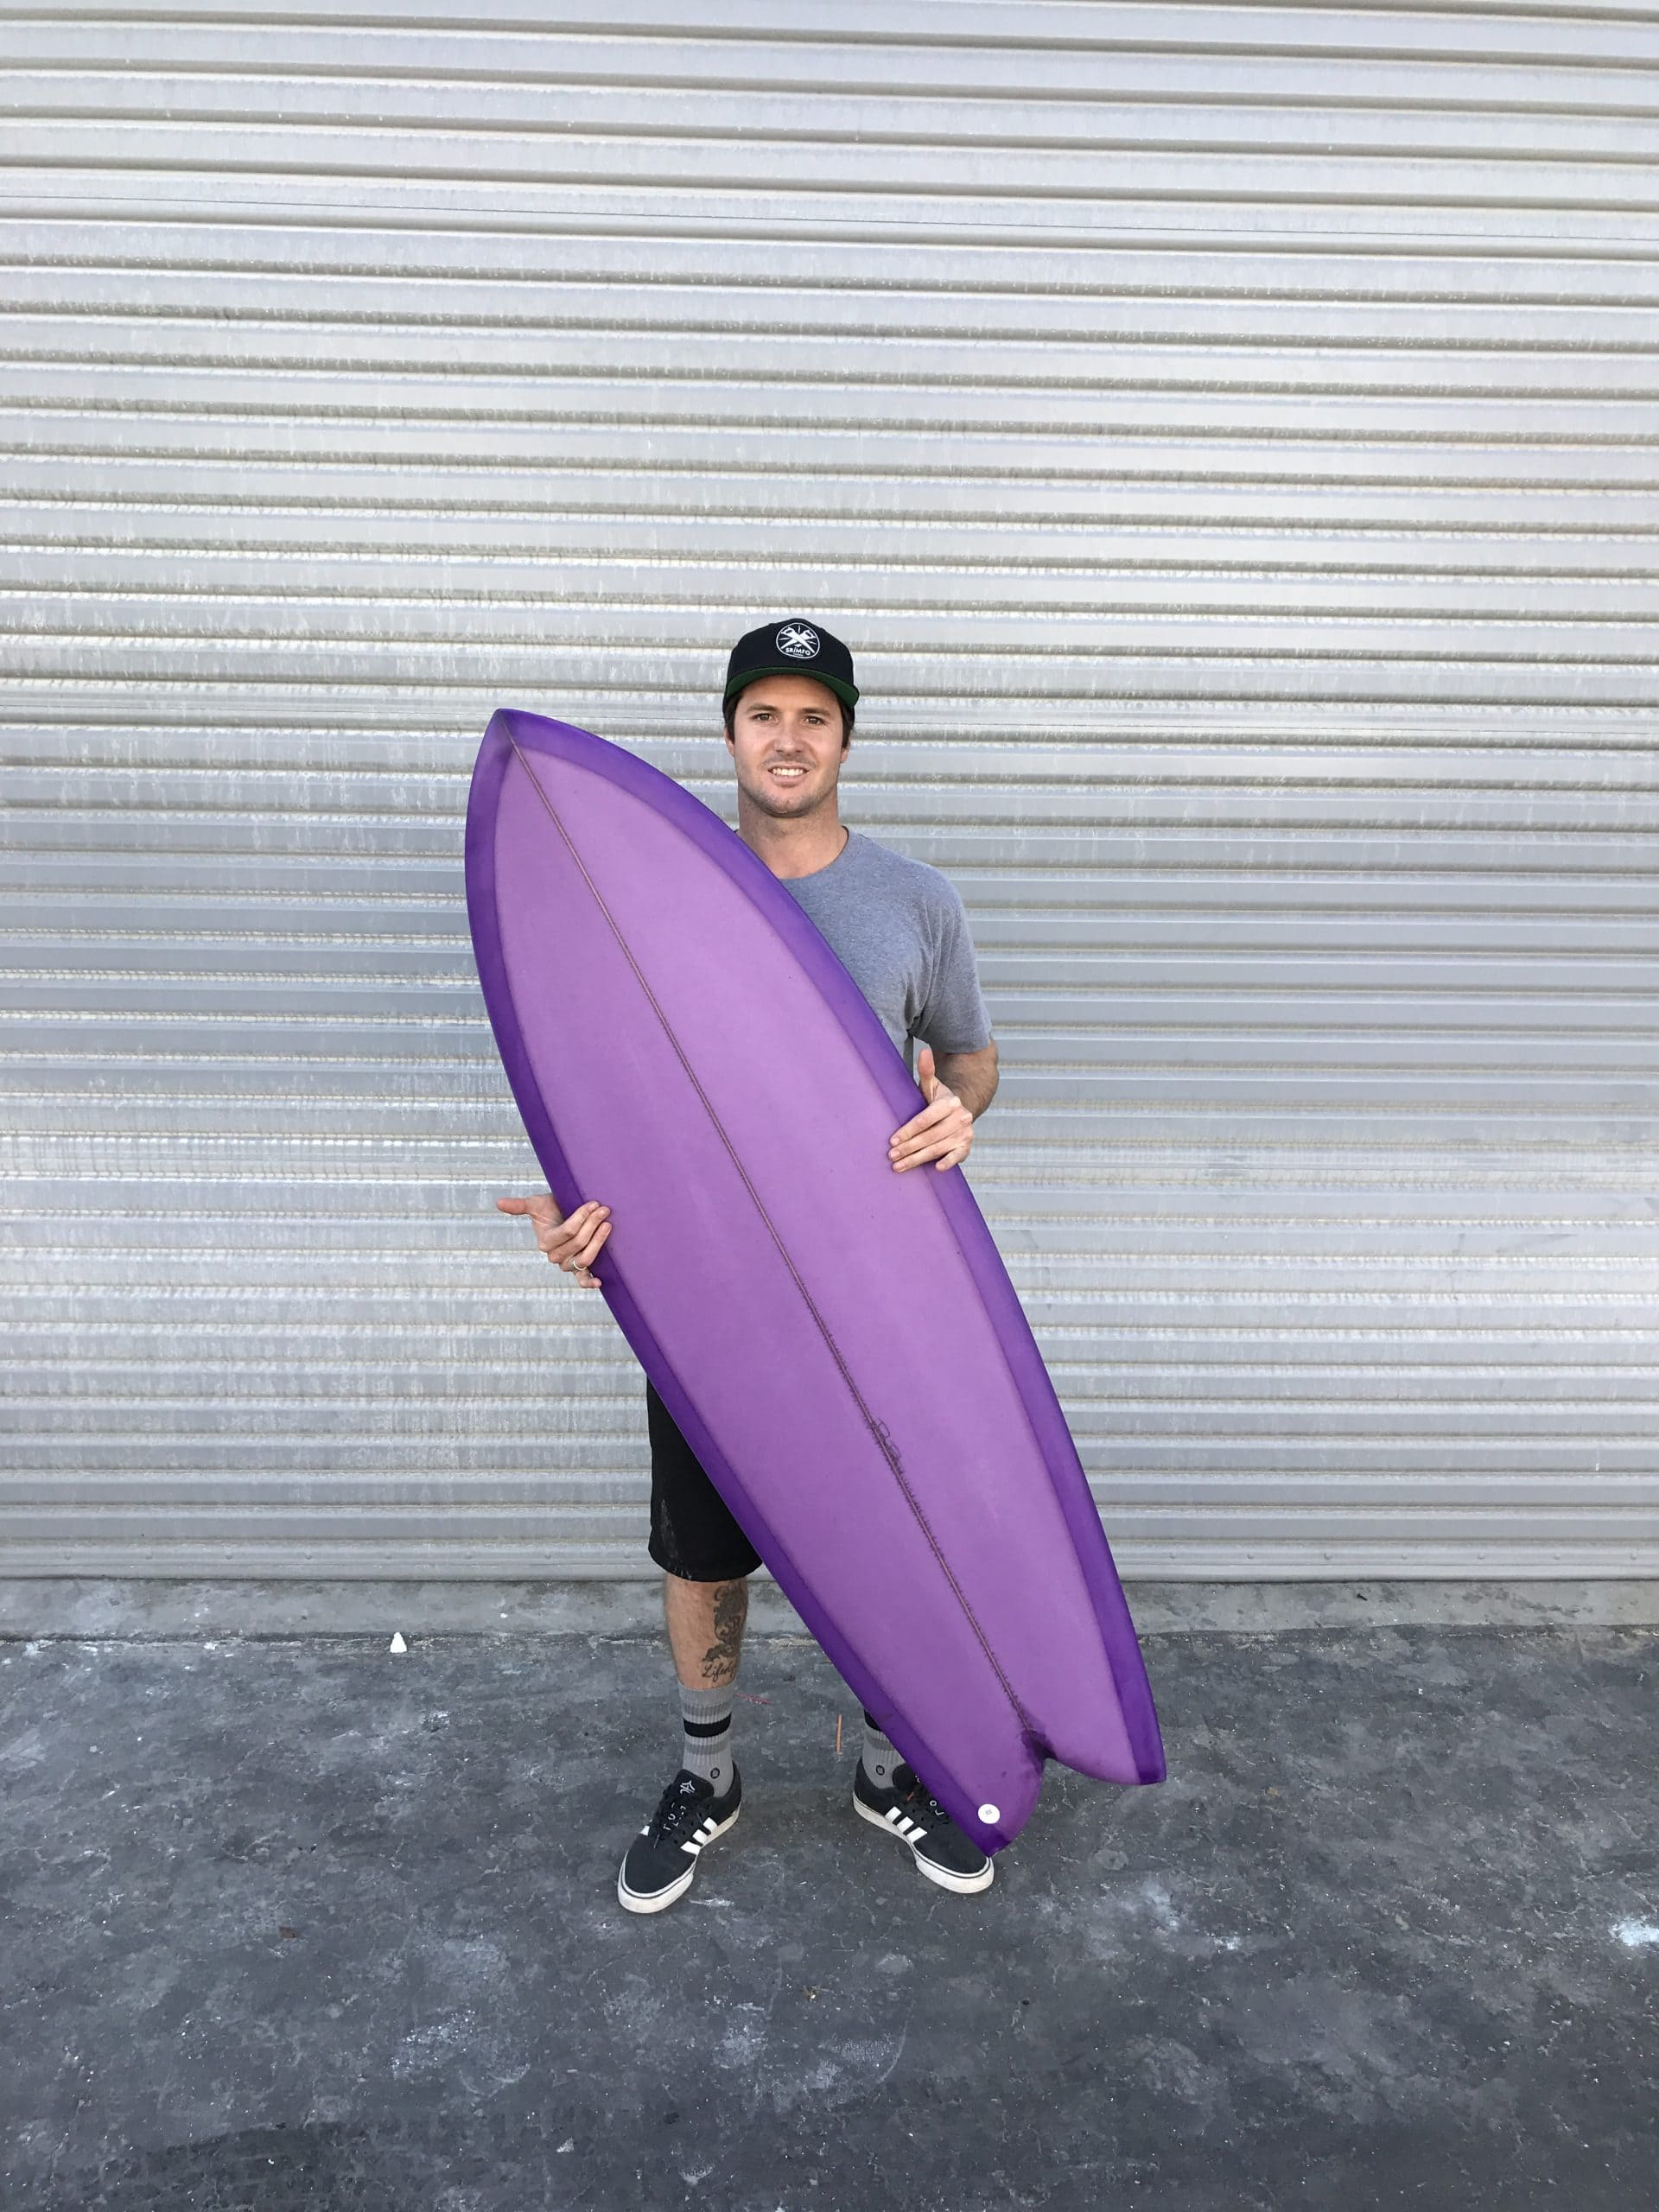 Guy holding a purple surf table